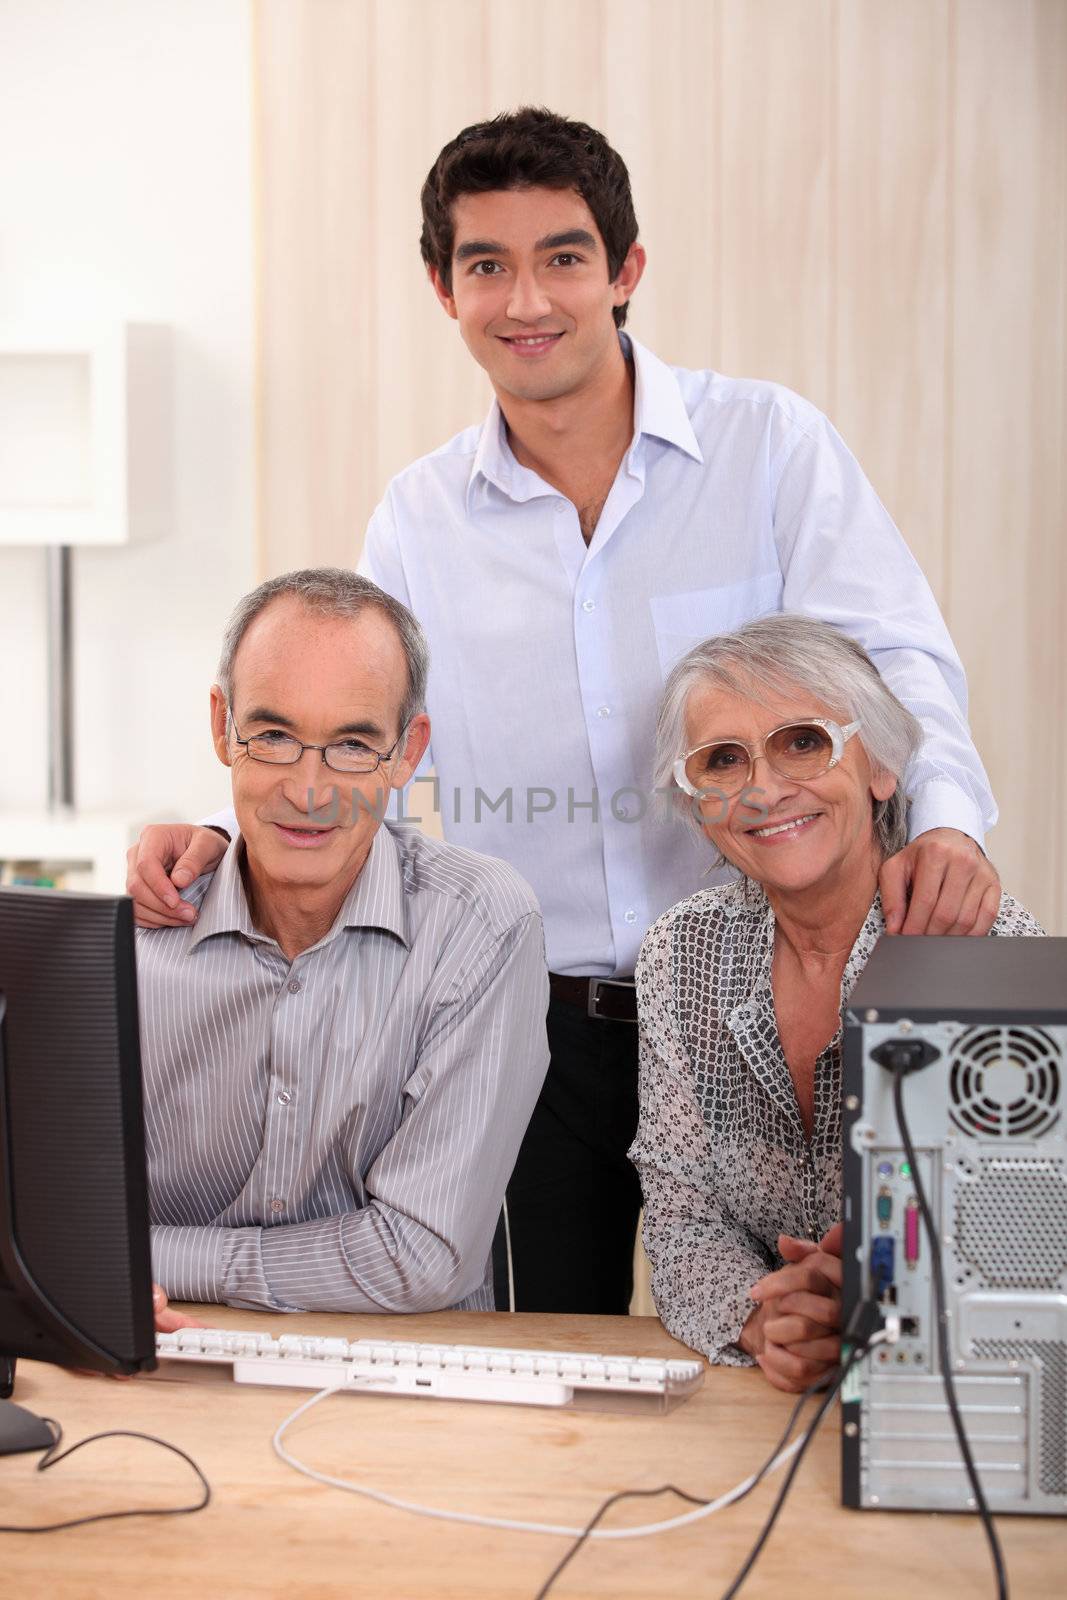 Grandson and grandparents by phovoir